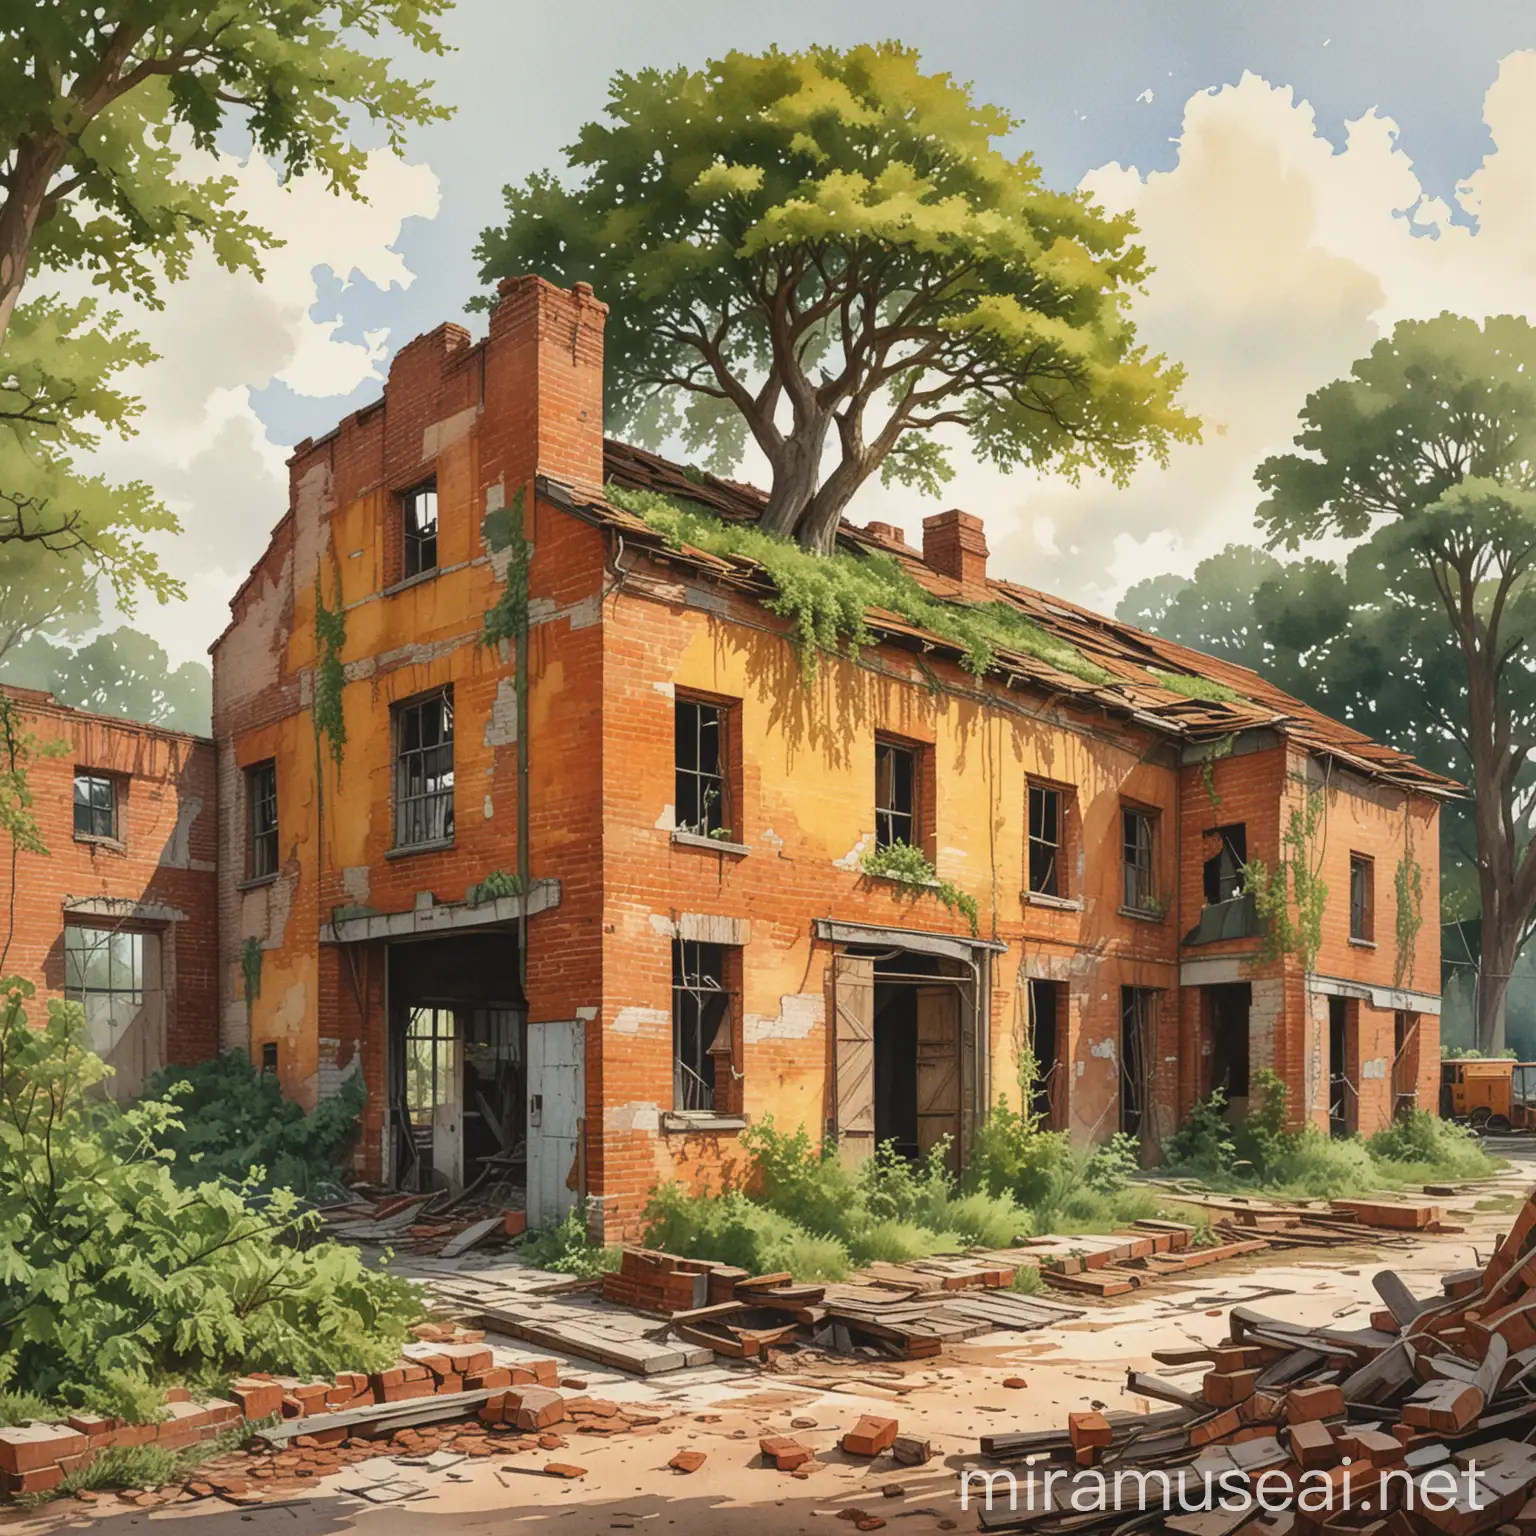 A watercolor painting of a ruined factory with orange and yellow brick siding. The factory has a slanted, vegetated, broken roof, with a giant green oak tree growing in and through its roof. The illustration is wooden-framed with the words 'Pax Fabrica'.